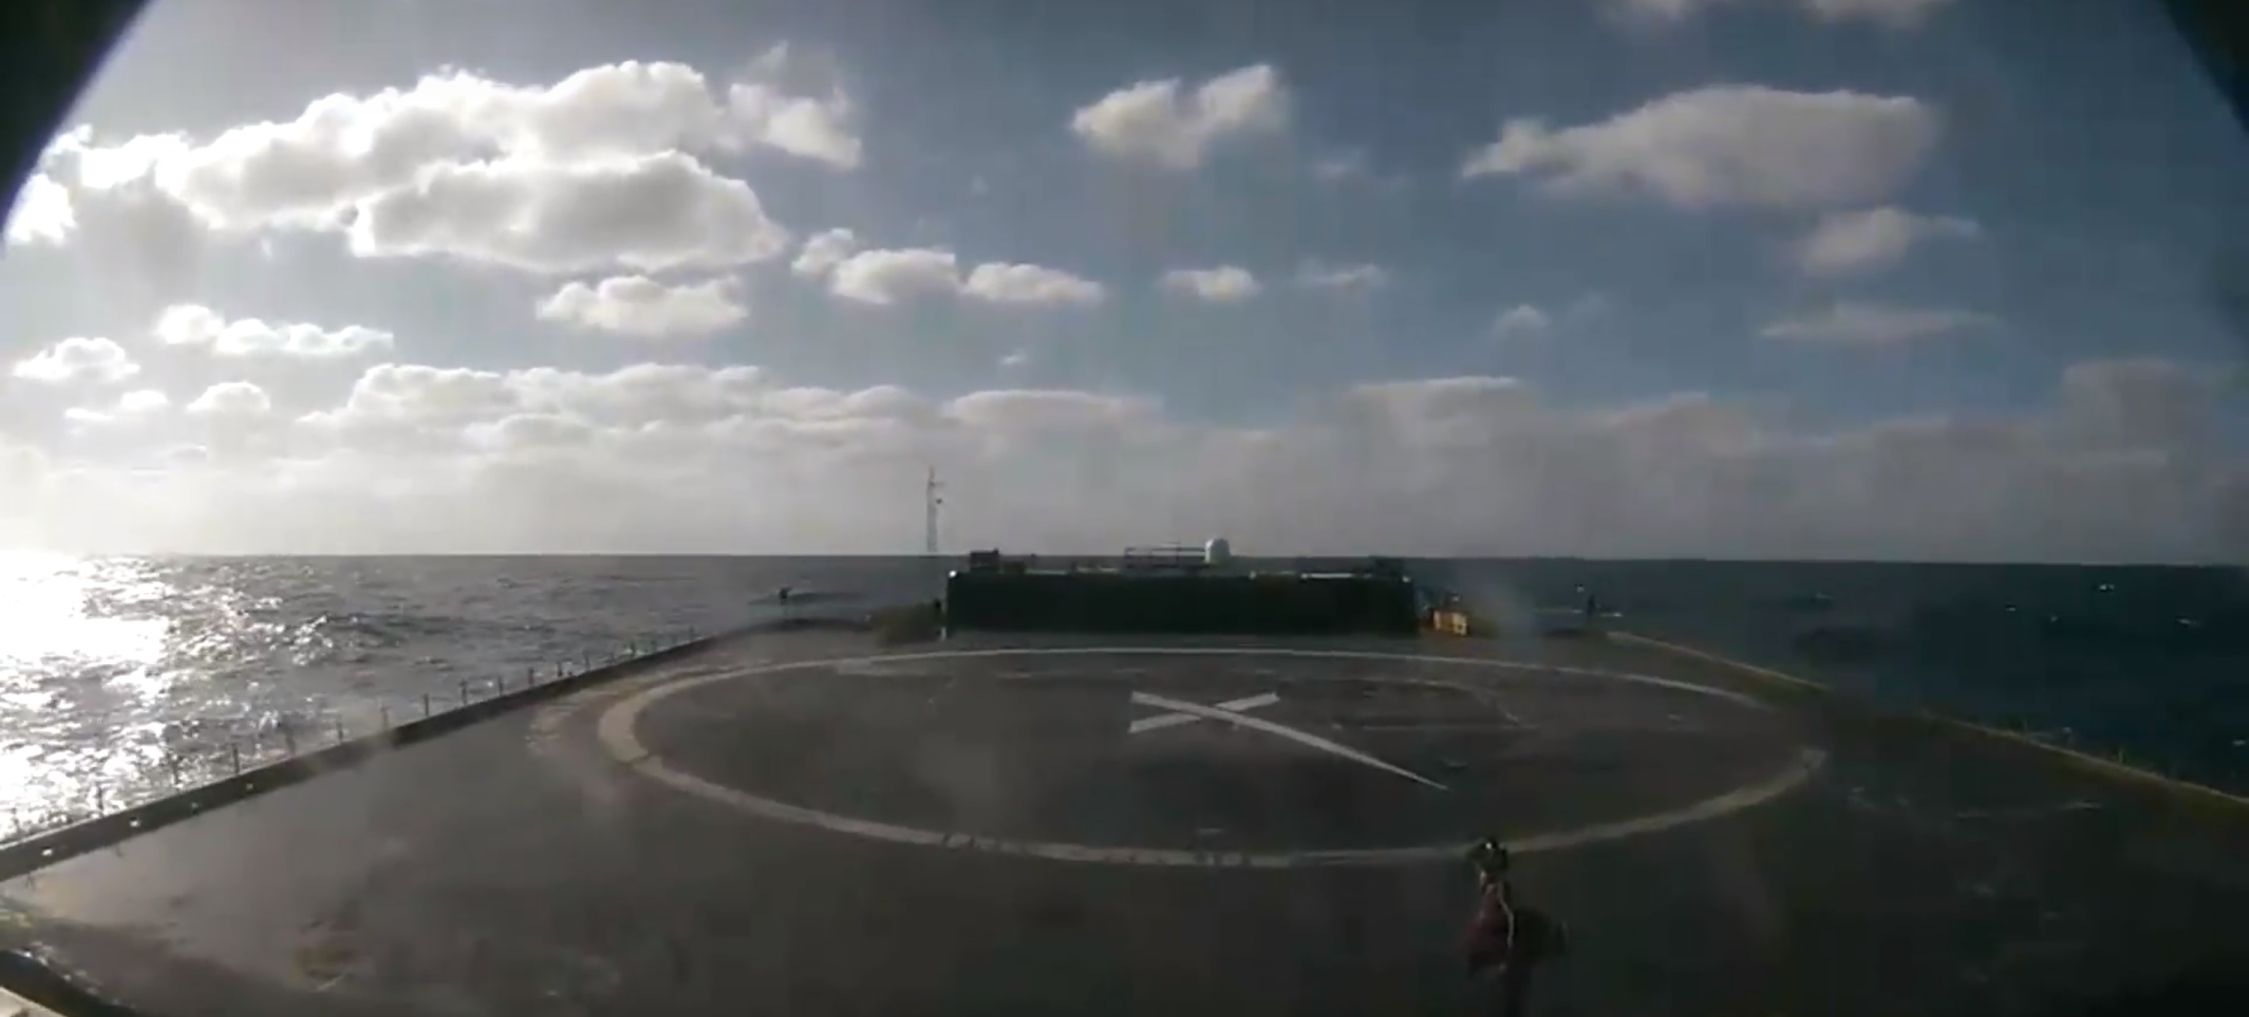 OCISLY Koreasat 5A (SpaceX)_1